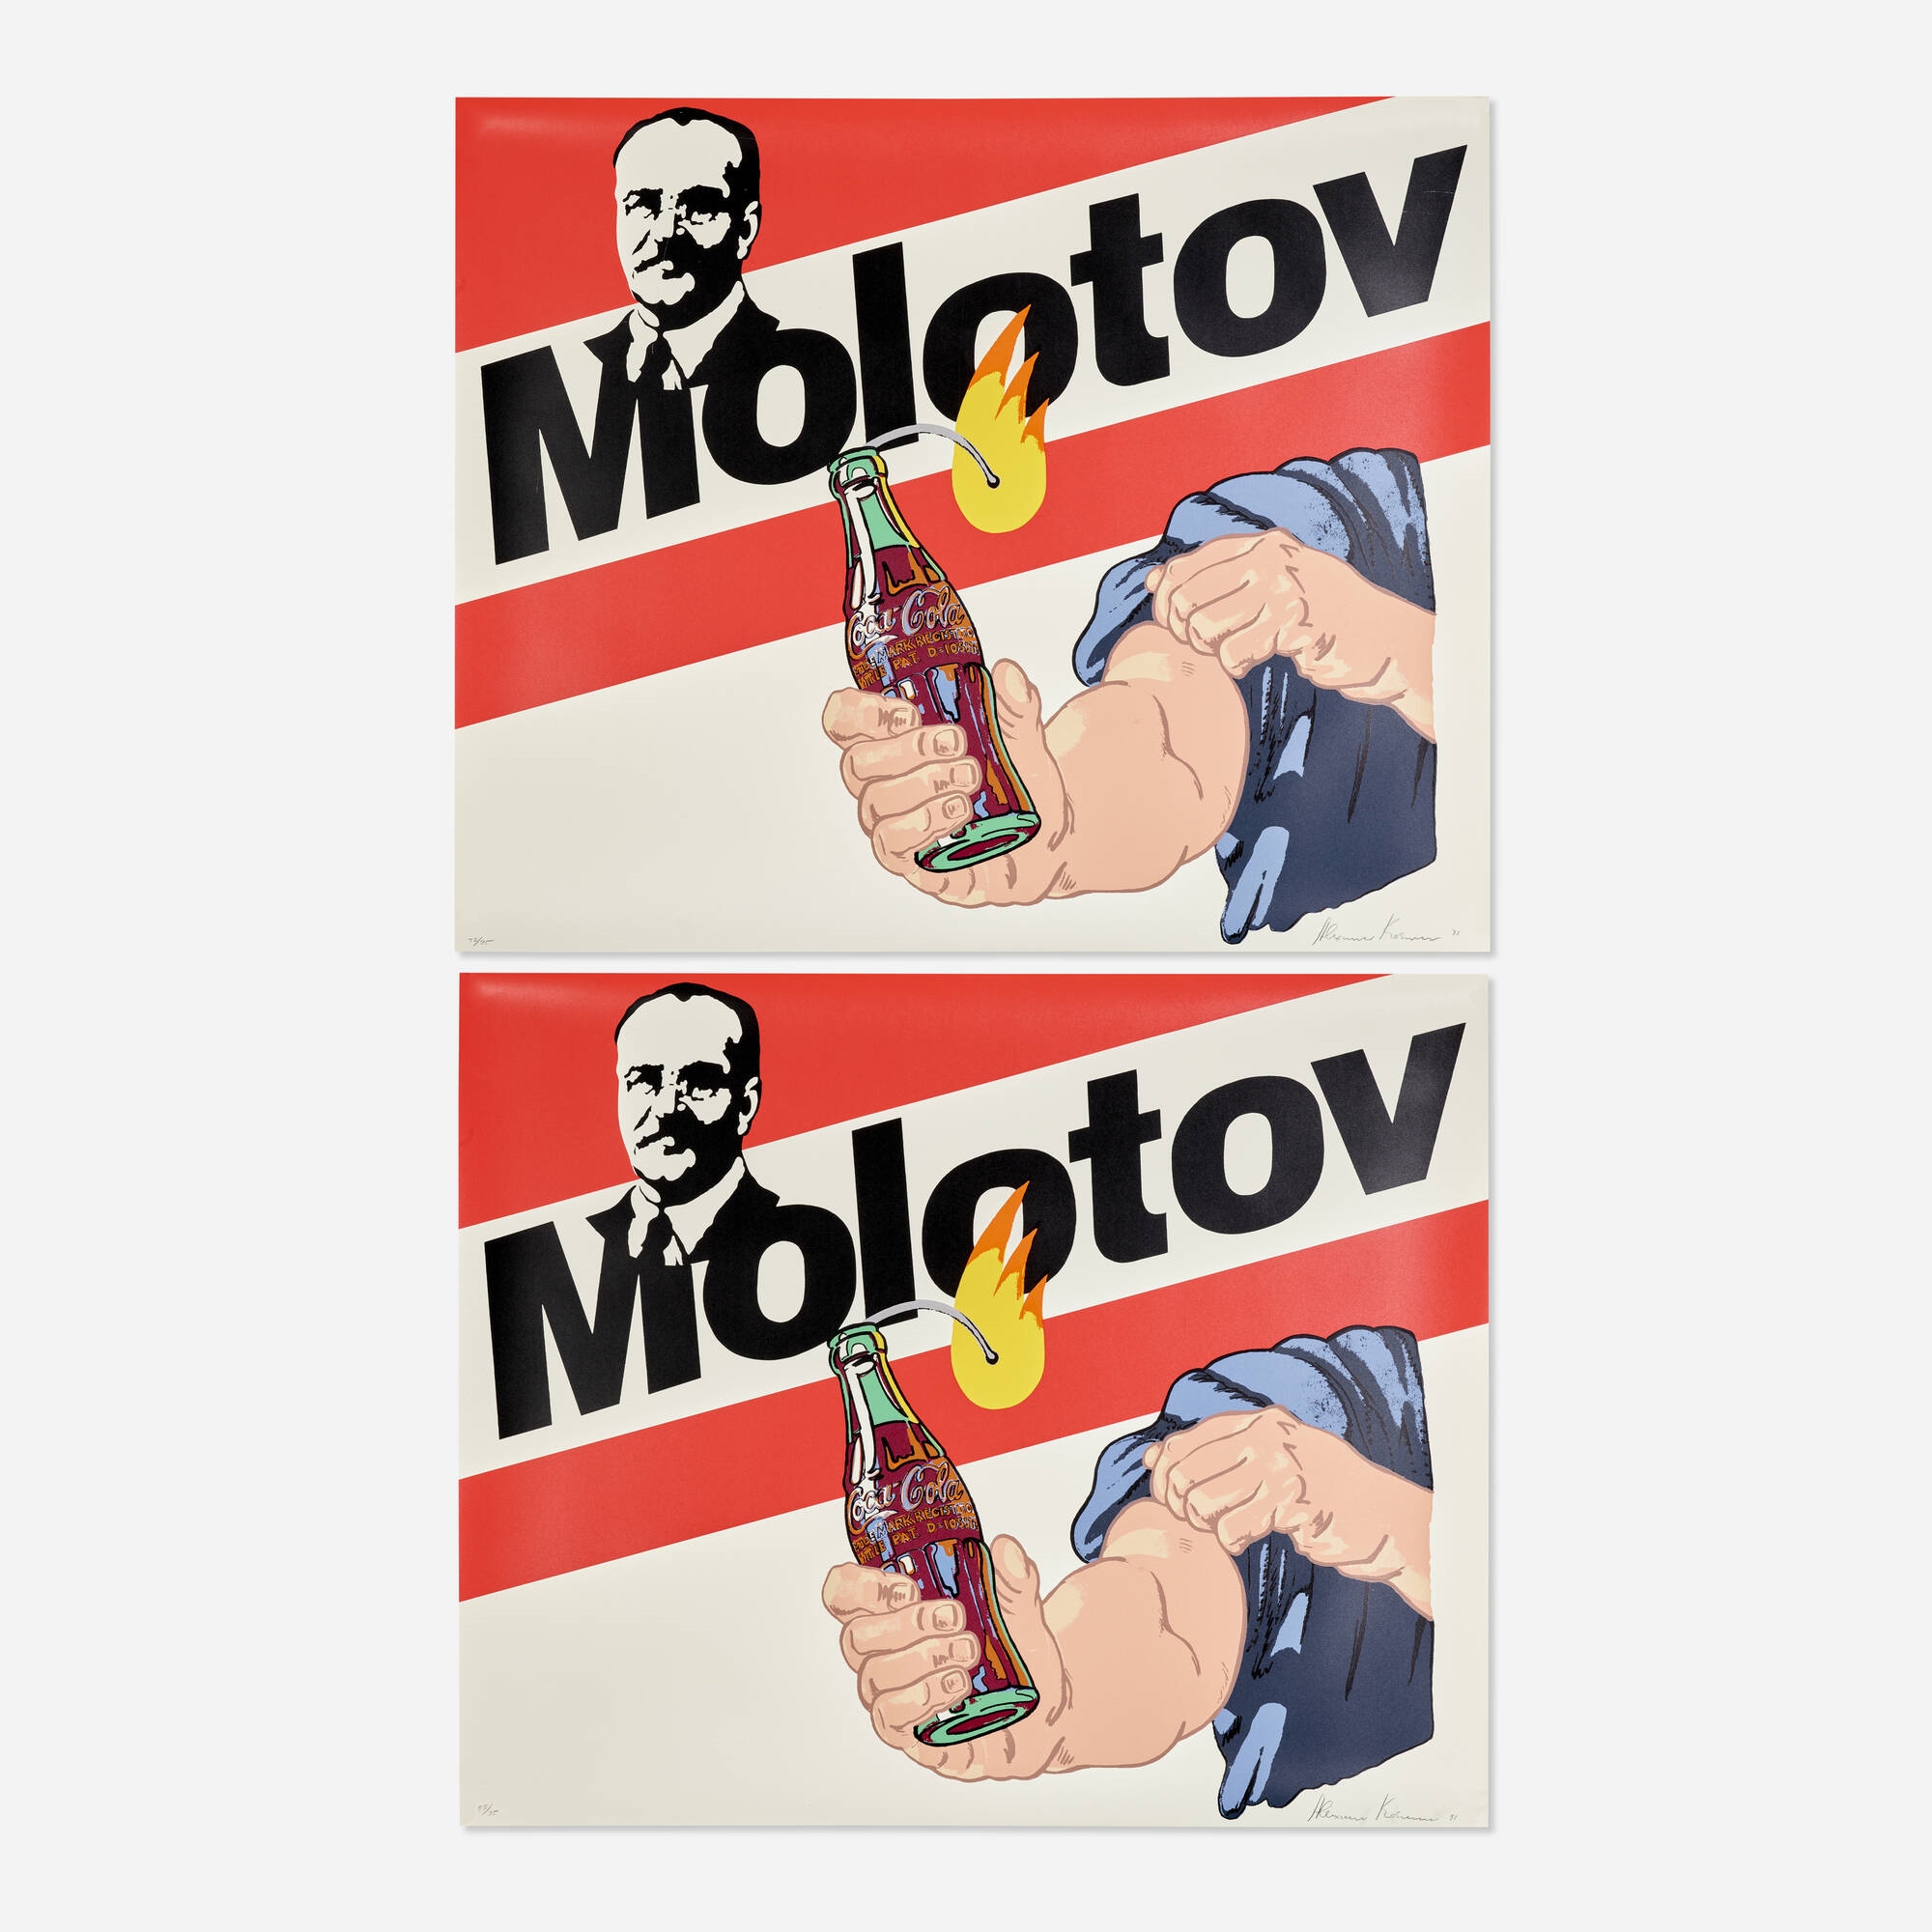 Artwork by Alexander Kosolapov, Molotov Cocktail (two works), Made of screenprint in colors